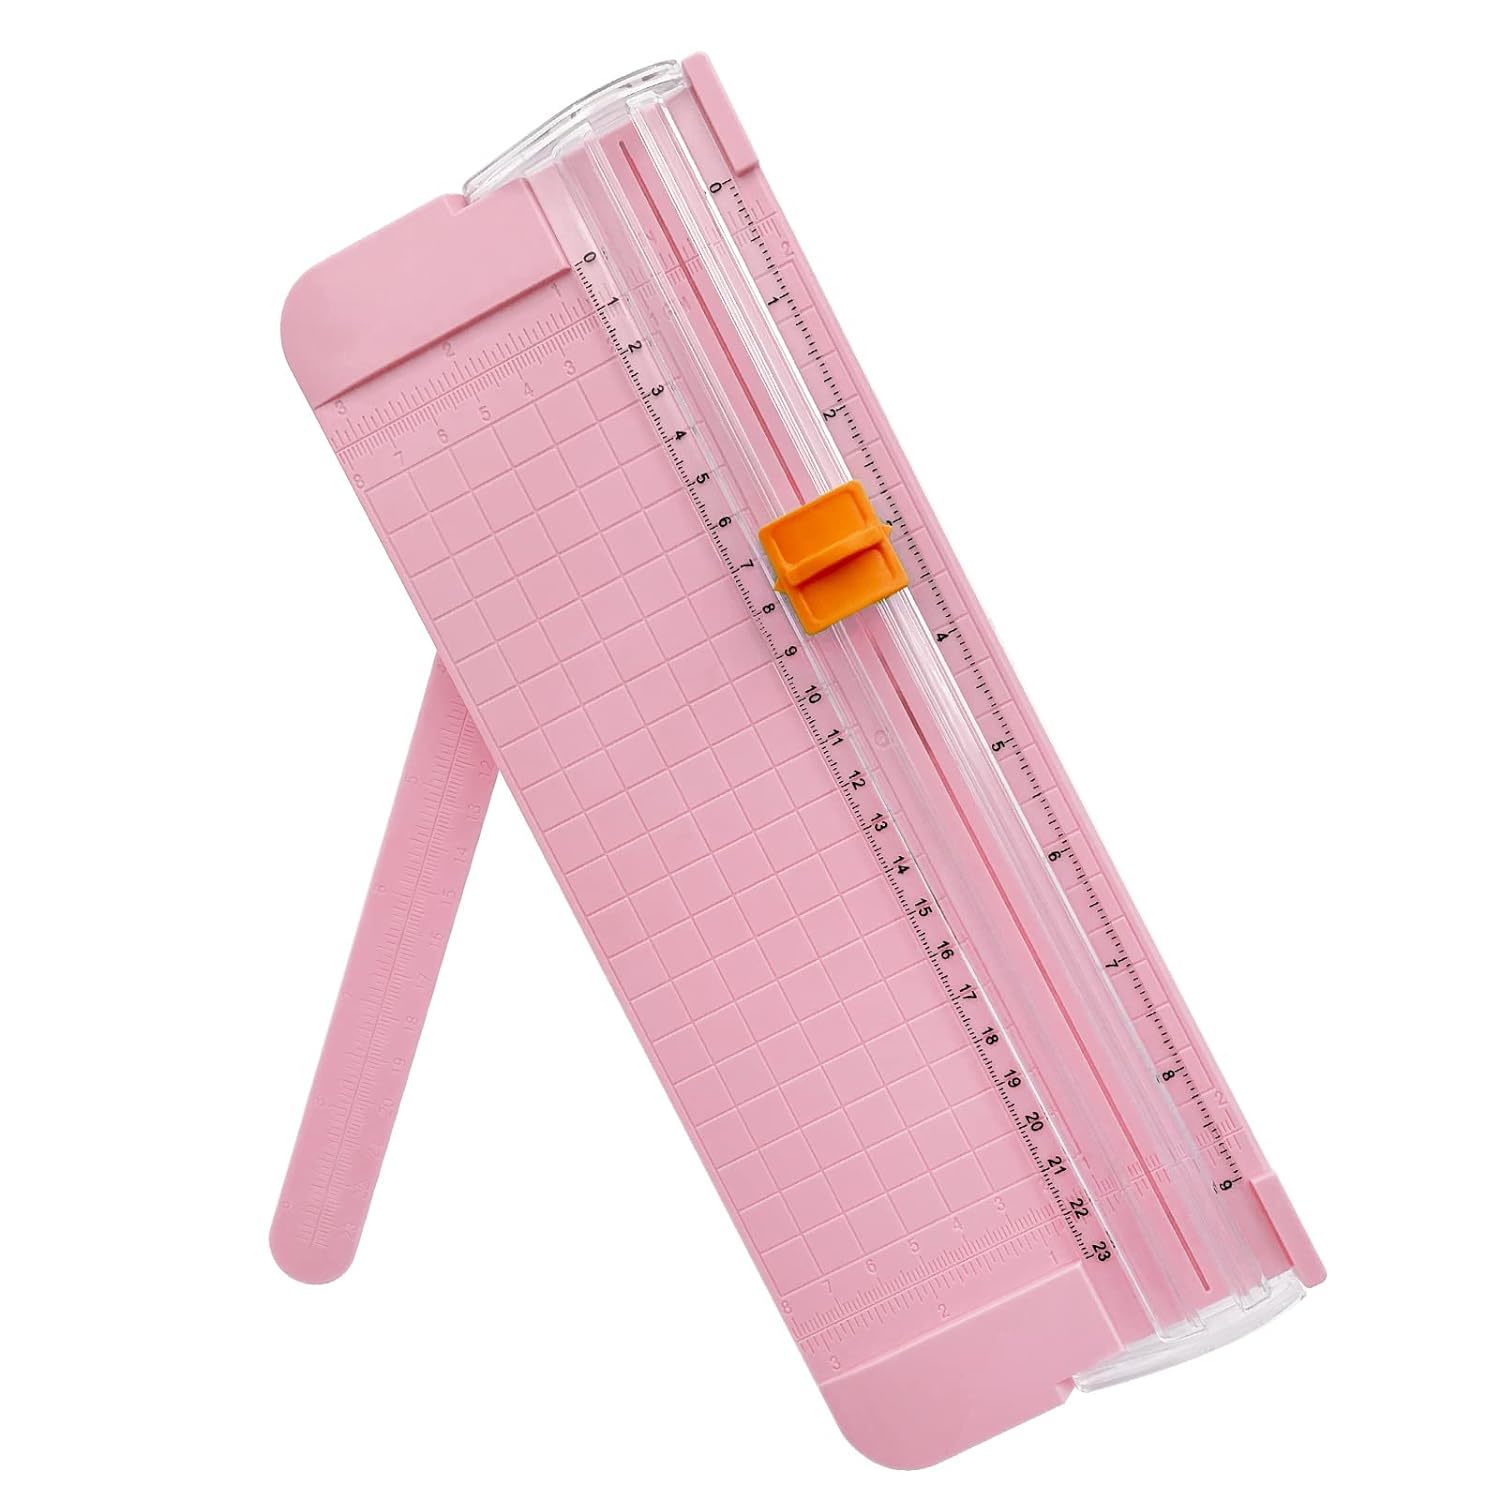 12 Inch Paper Trimmer, A4 Size Paper Cutter with Automatic Security  Safeguard for Coupon, Craft Paper and Photos (Pink)